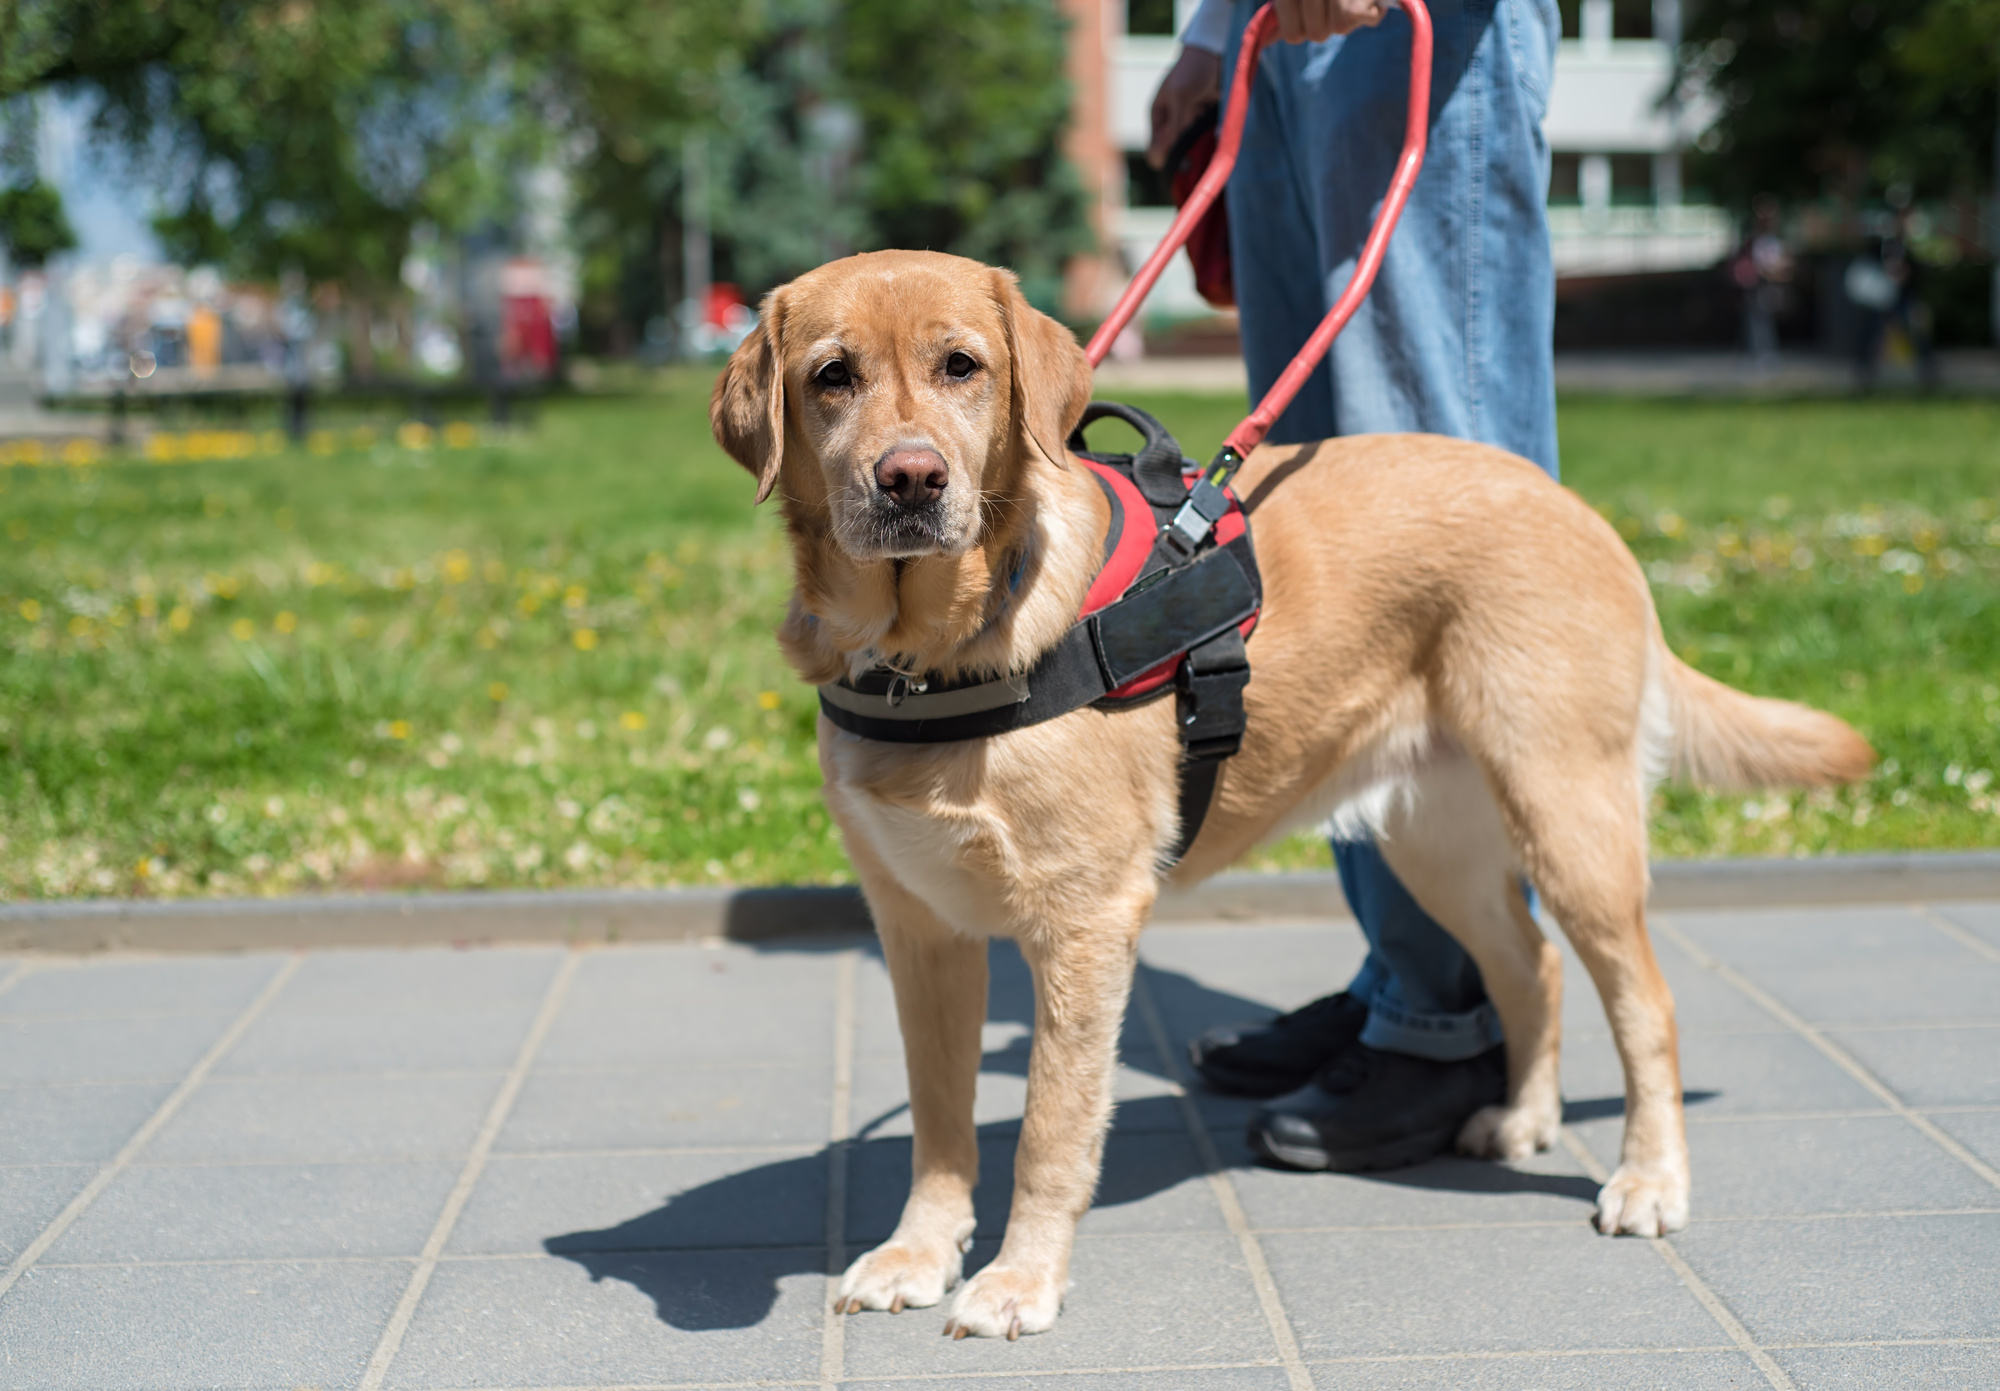 What Is Considered a Service Dog?